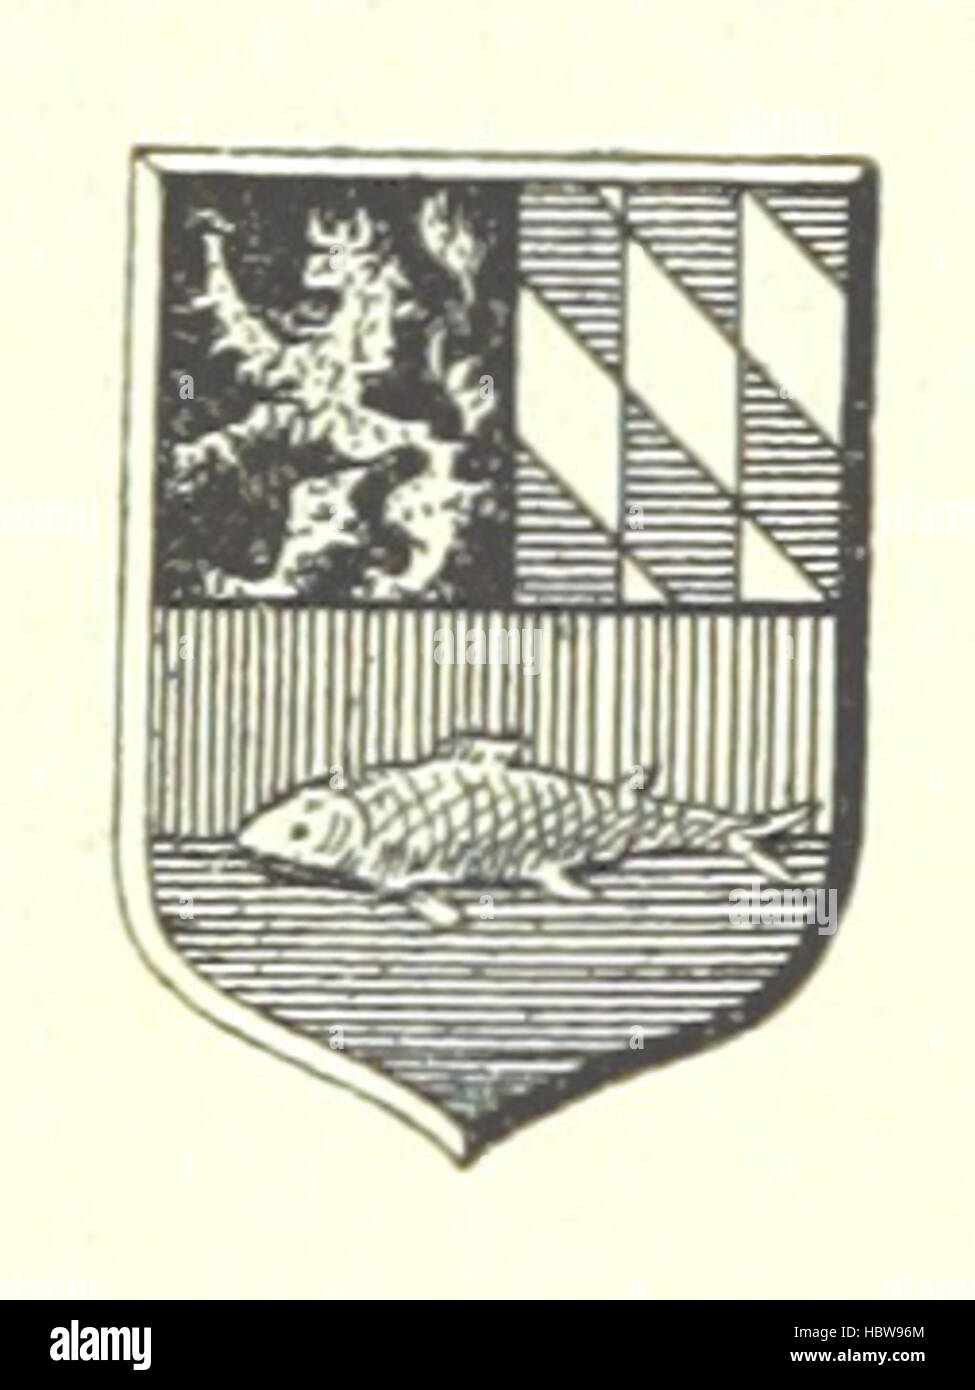 Image taken from page 792 of 'Geographisch-historisches Handbuch von Bayern' Image taken from page 792 of 'Geographisch-historisches Handbuch von Bayern' Stock Photo